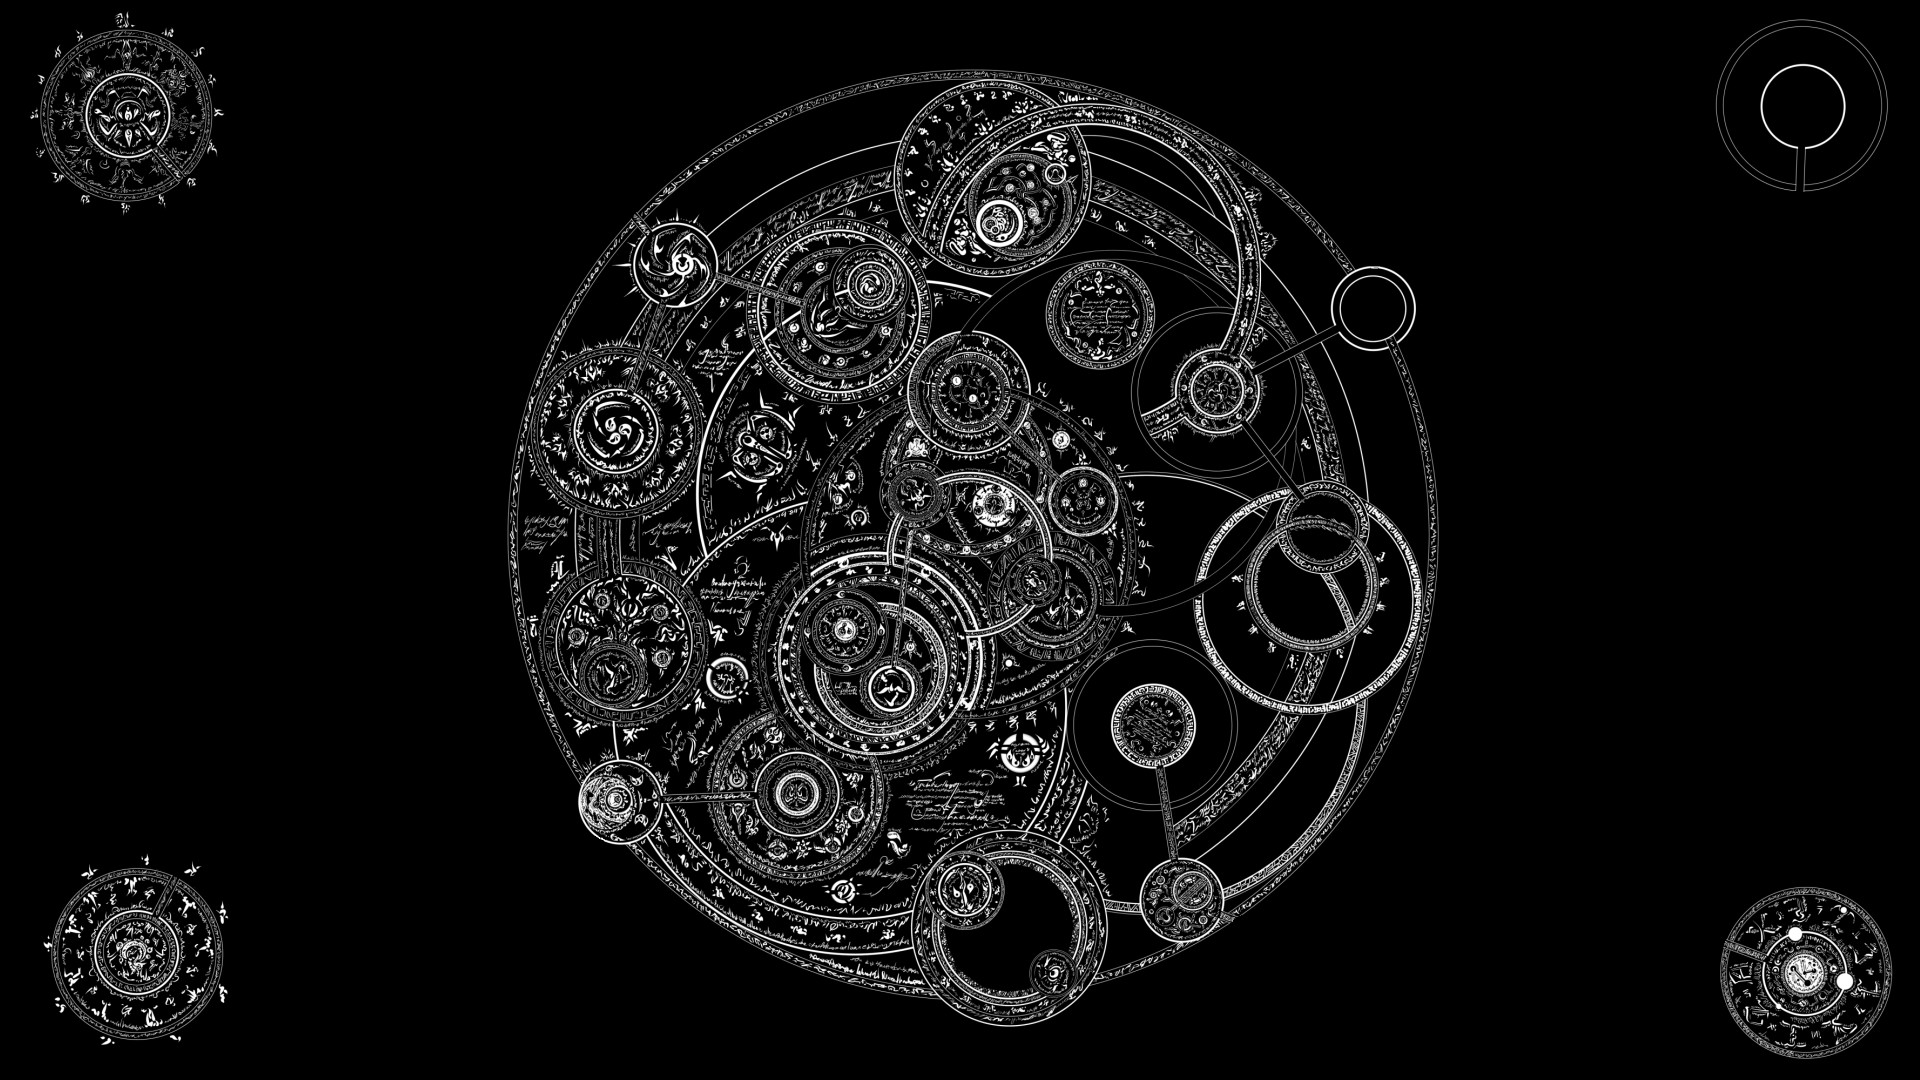 Abstract patterns circles alchemy black background wallpaper